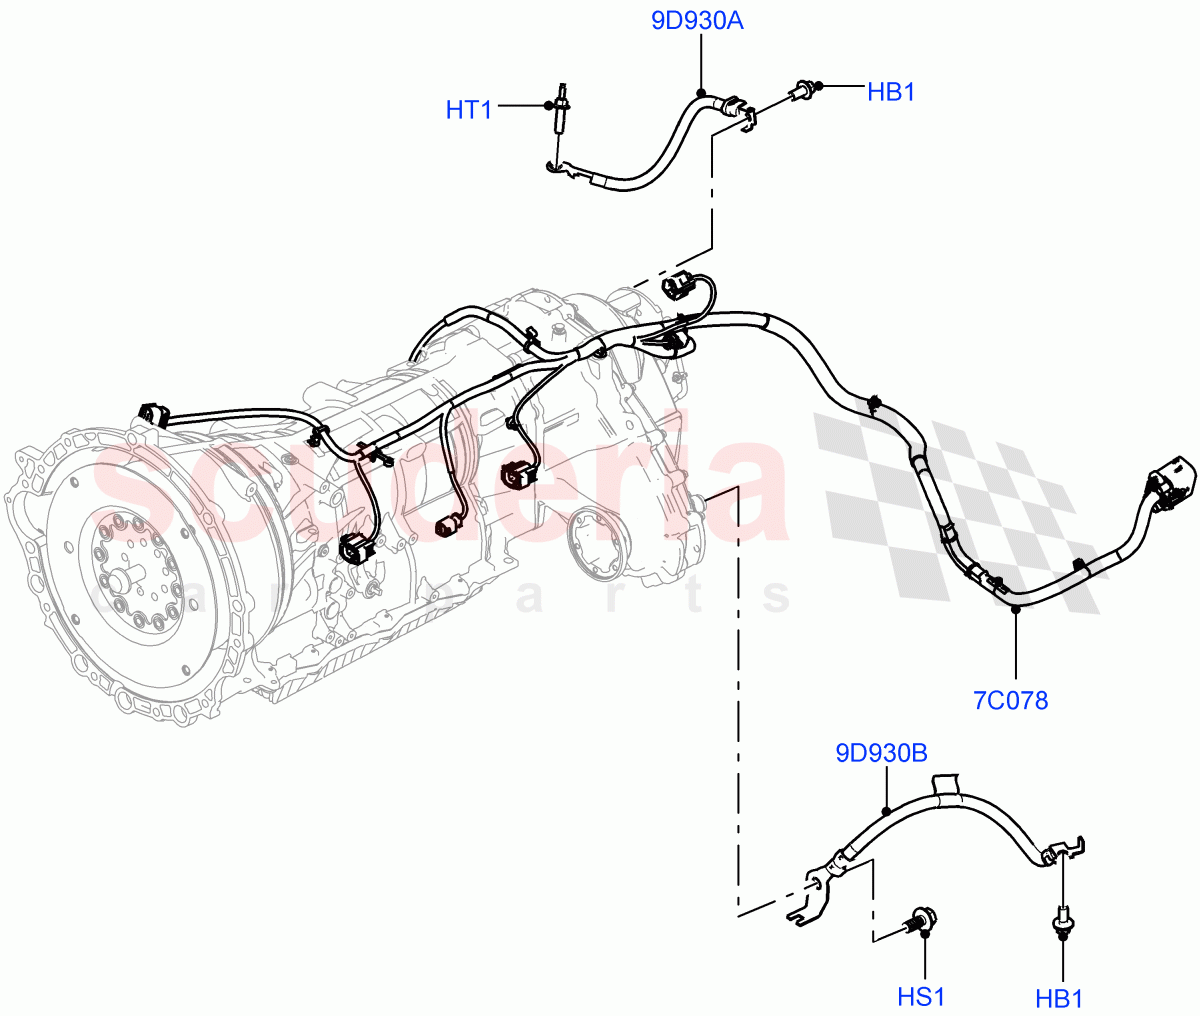 Transmission Harness(Solihull Plant Build)((V)FROMHA000001) of Land Rover Land Rover Discovery 5 (2017+) [3.0 I6 Turbo Diesel AJ20D6]